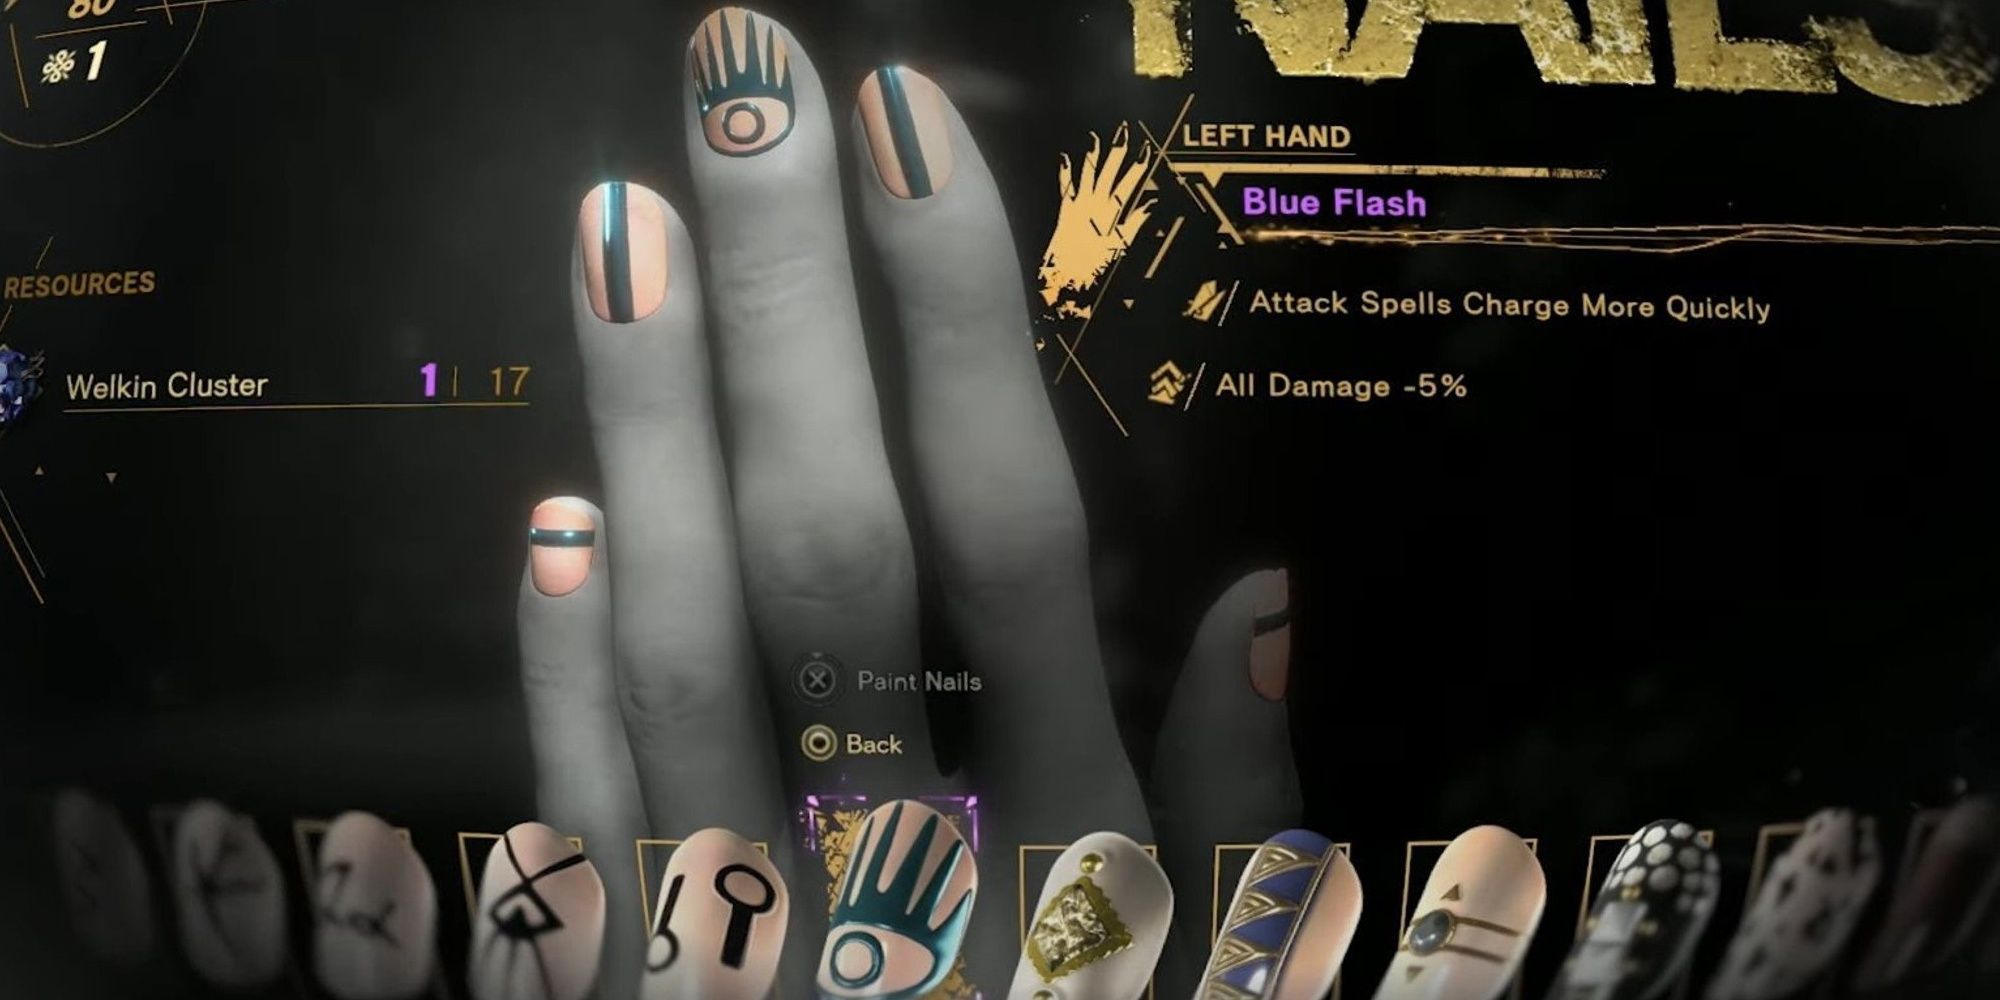 The Forspoken character is looking at the nail design menu and showcasing the Blue Flash Nail Design that increases damage and allows attack spells to charge more quickly.